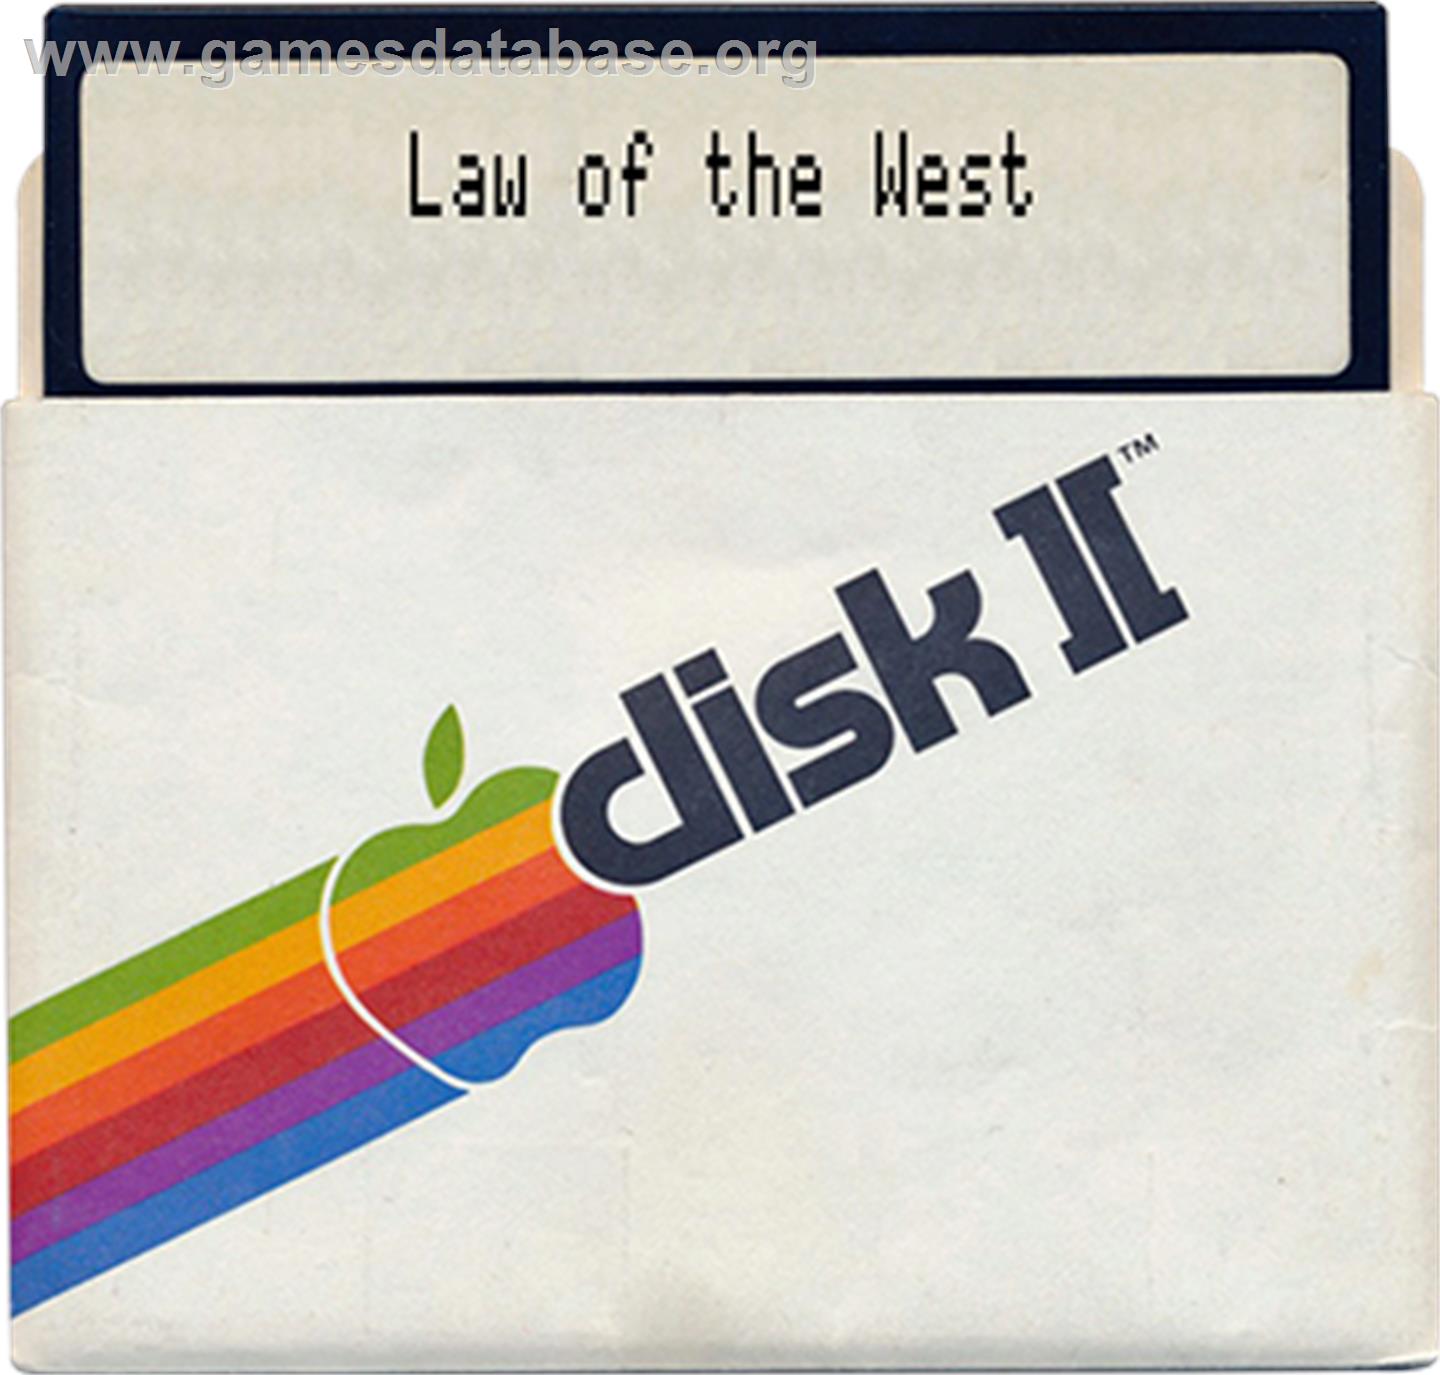 Law of the West - Apple II - Artwork - Disc